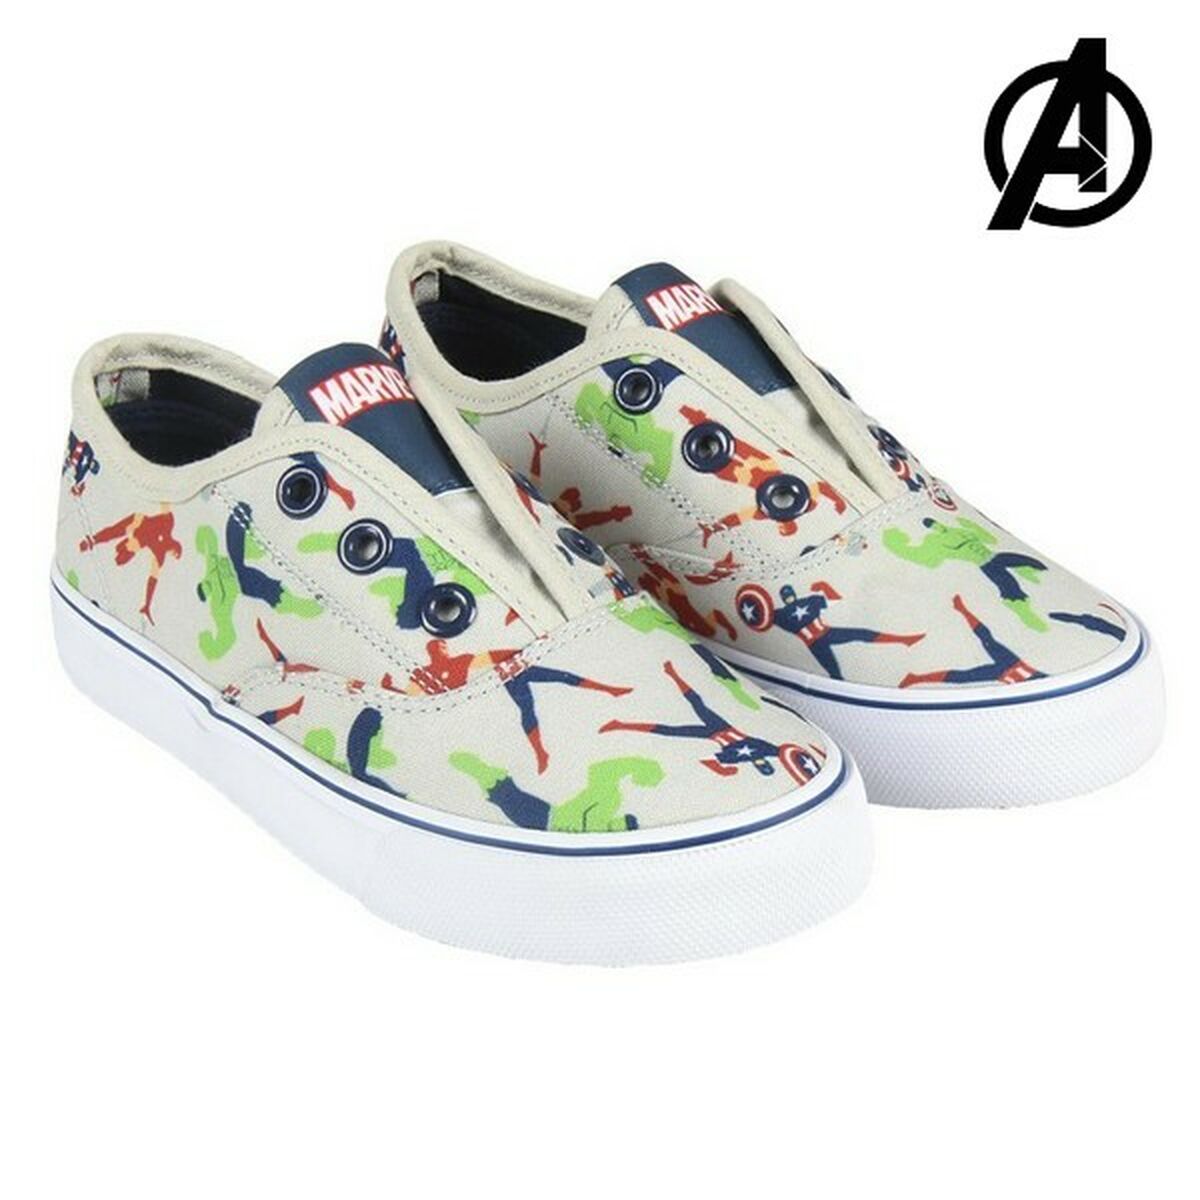 Chaussures casual The Avengers 73579